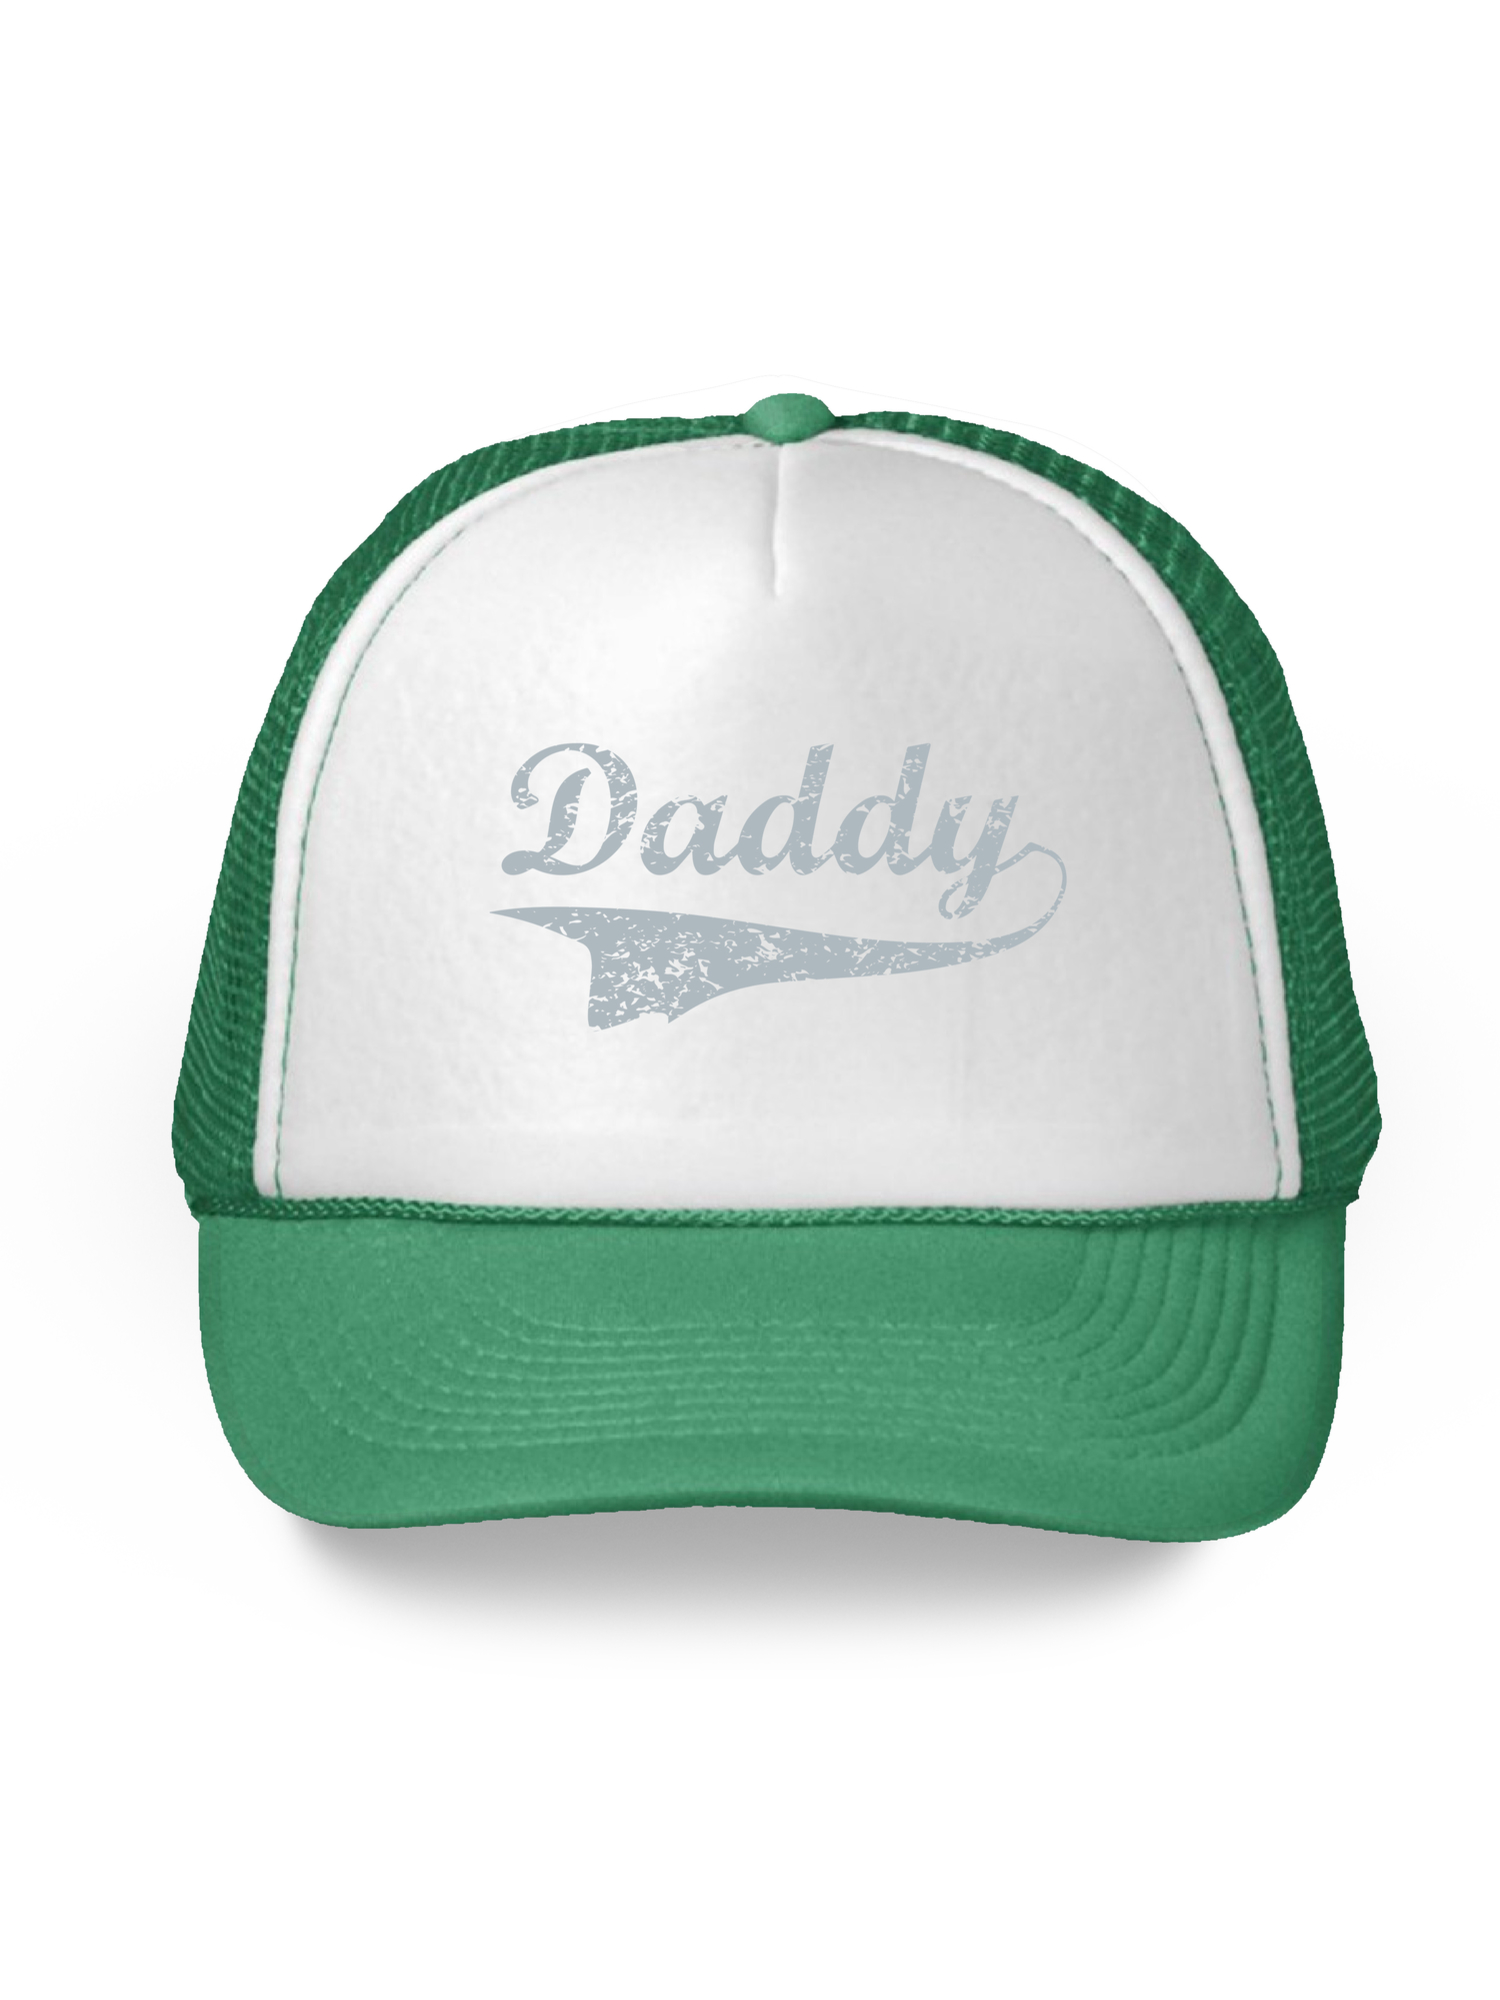 Awkward Styles Daddy Hat Father's Day Gifts for Men Dad Hats Dad 2018 Trucker Hat Funny Gifts for Dad Hat Accessories for Men Father Trucker Hat Daddy 2018 Snapback Hat Dad Hats with Sayings - image 1 of 6